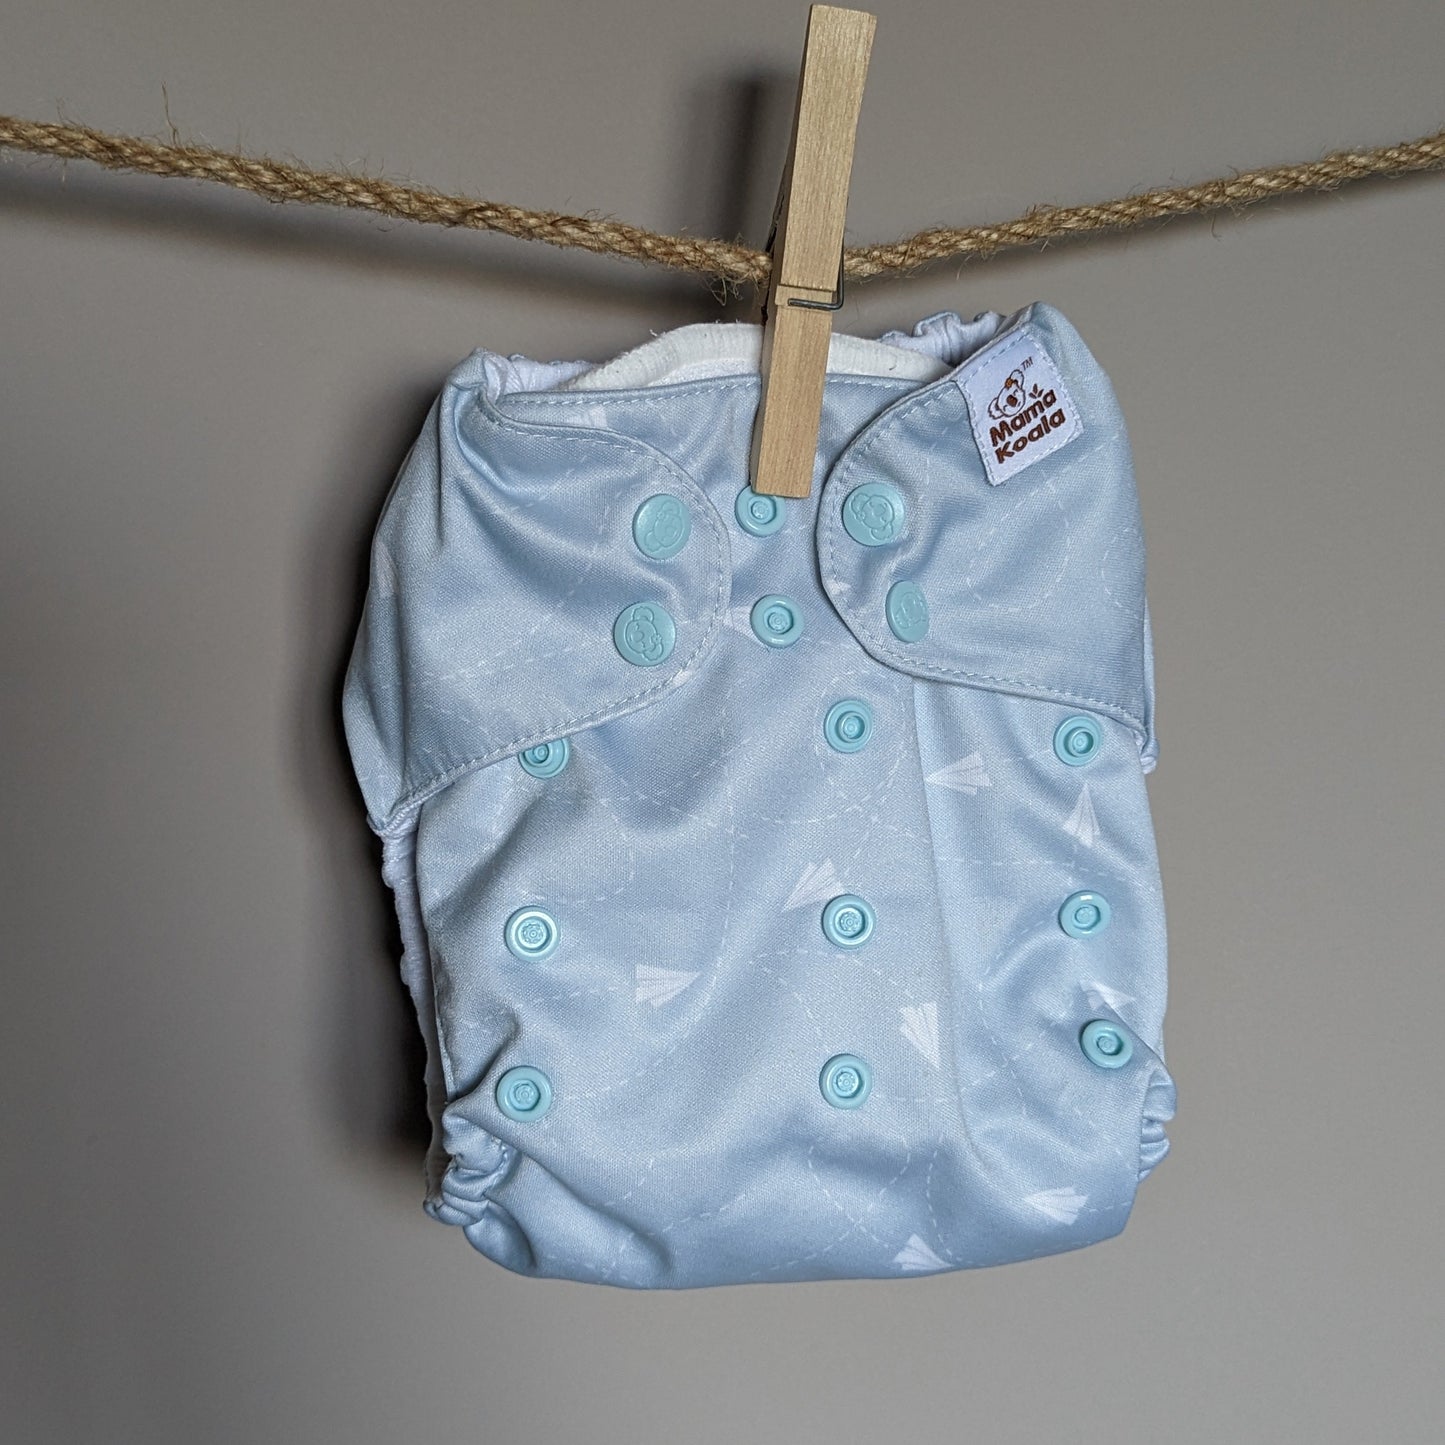 Moma Koala Pocket Nappy-Pocket Nappy-Moma Koala-Paper Airplane-The Nappy Market